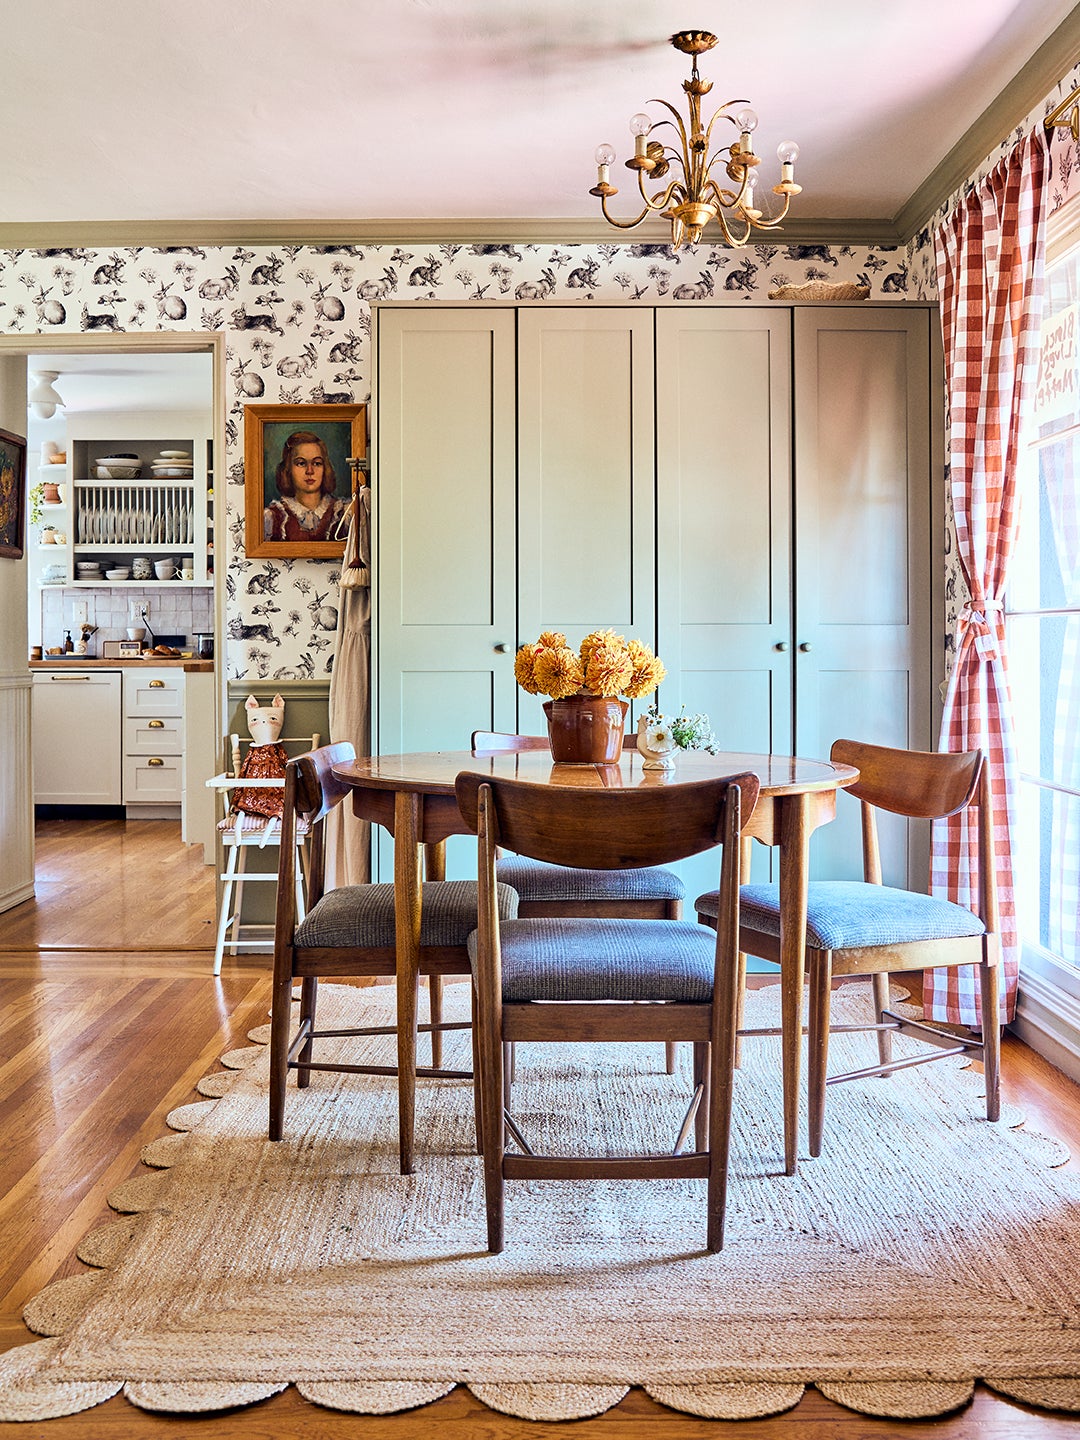 wallpapered dining room with built-in cabinets